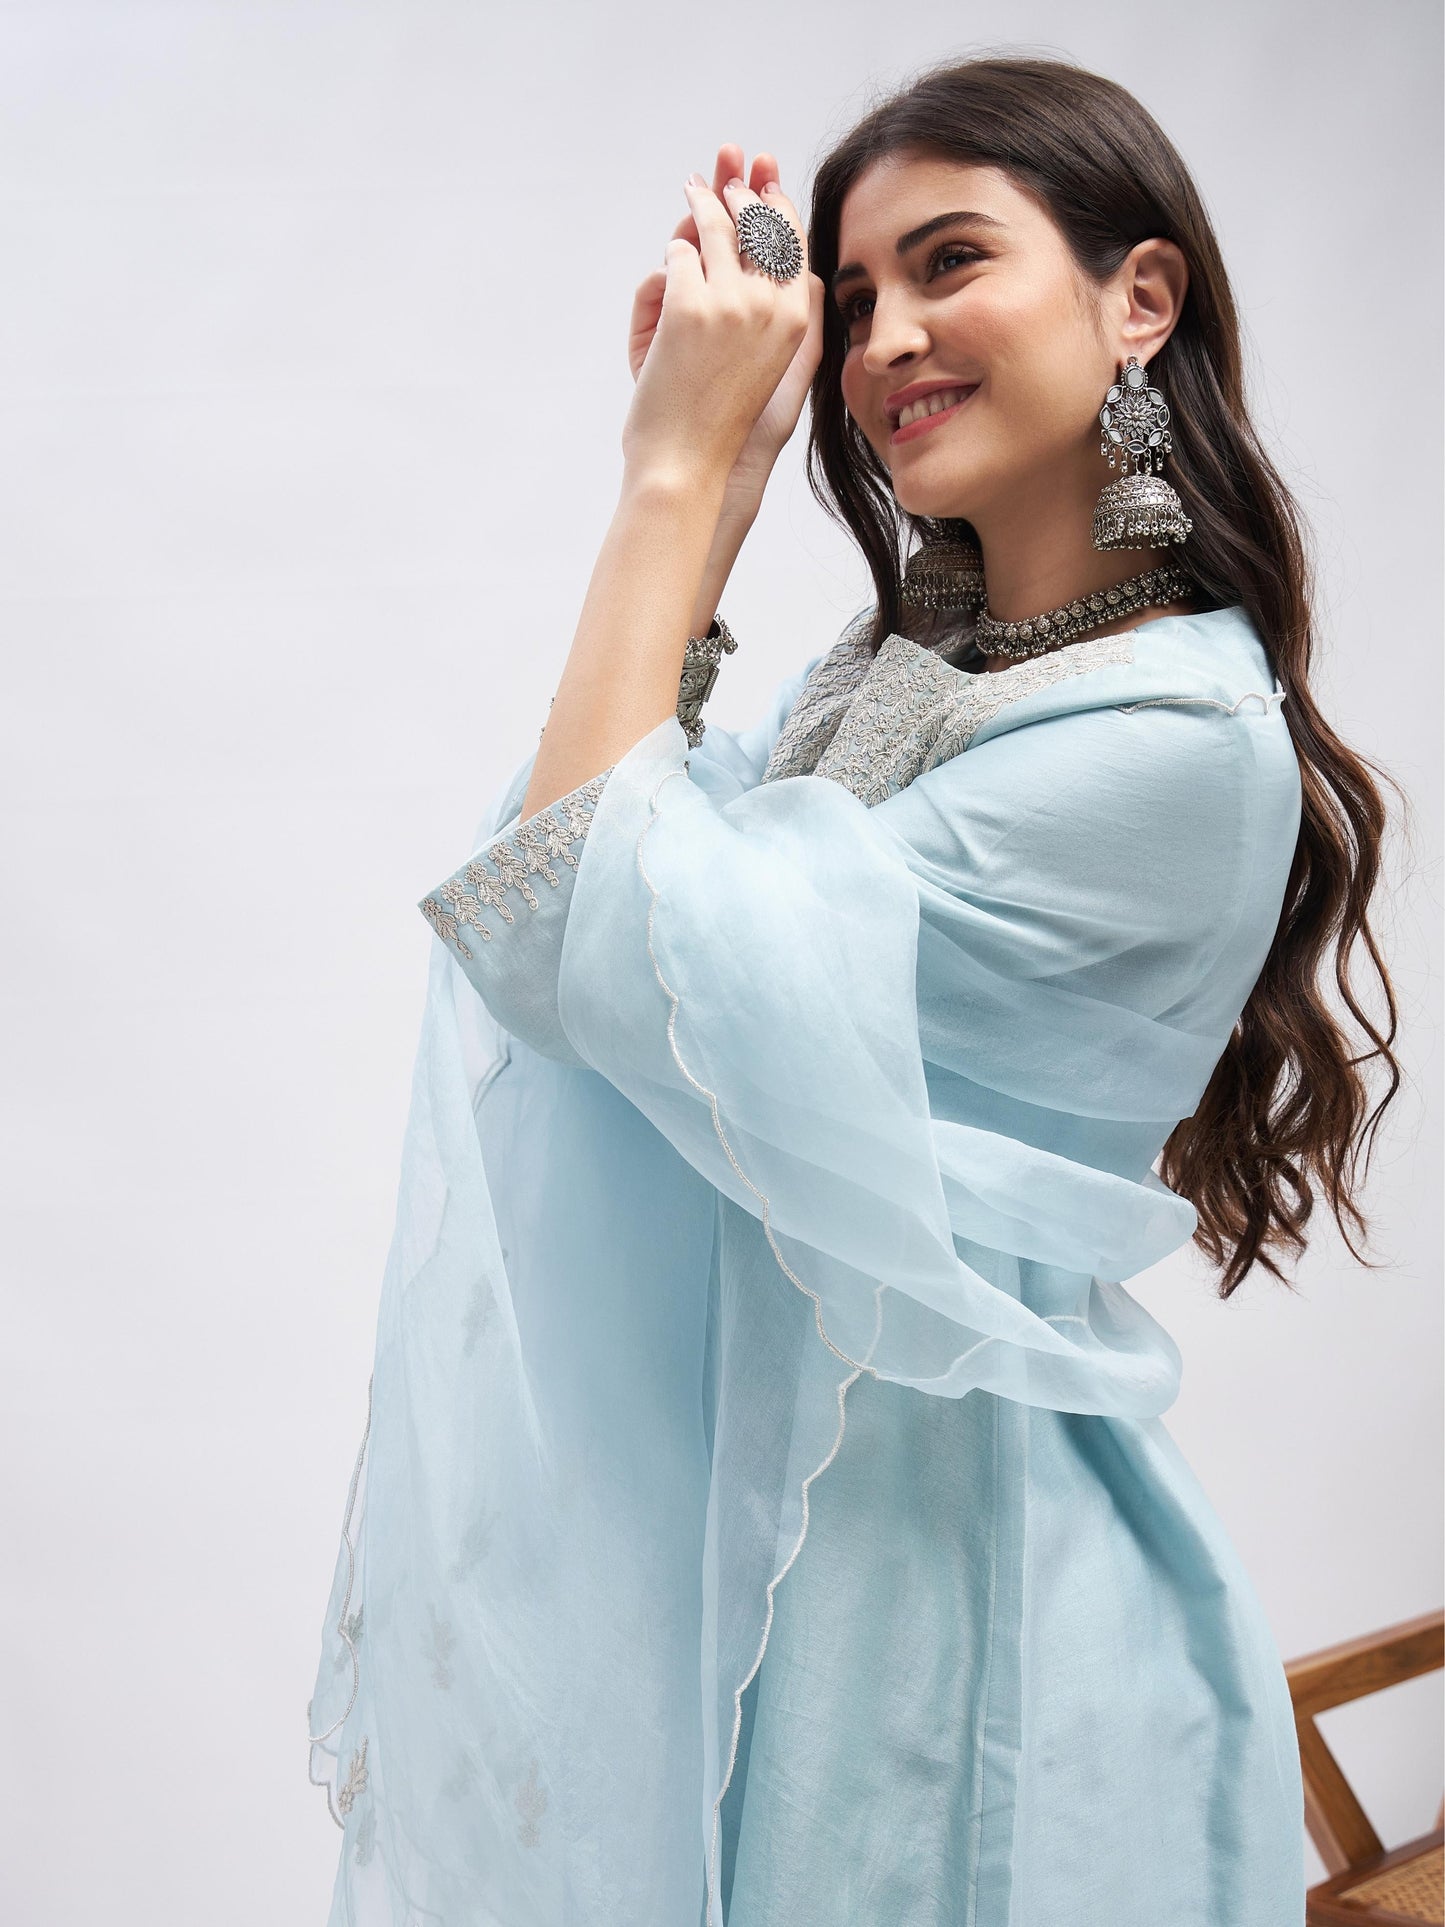 Blue Zari Embroidered Chanderi Silk Kurta Set with Dupatta at Kamakhyaa by RoohbyRidhimaa. This item is Blue, Casual Wear, Chanderi Silk, Cotton, Dupattas, Embroidered, Kurta Set with Dupattas, Kurta Sets, Organza, Relaxed Fit, Silk Chanderi, Toxin free, Zari Embroidered